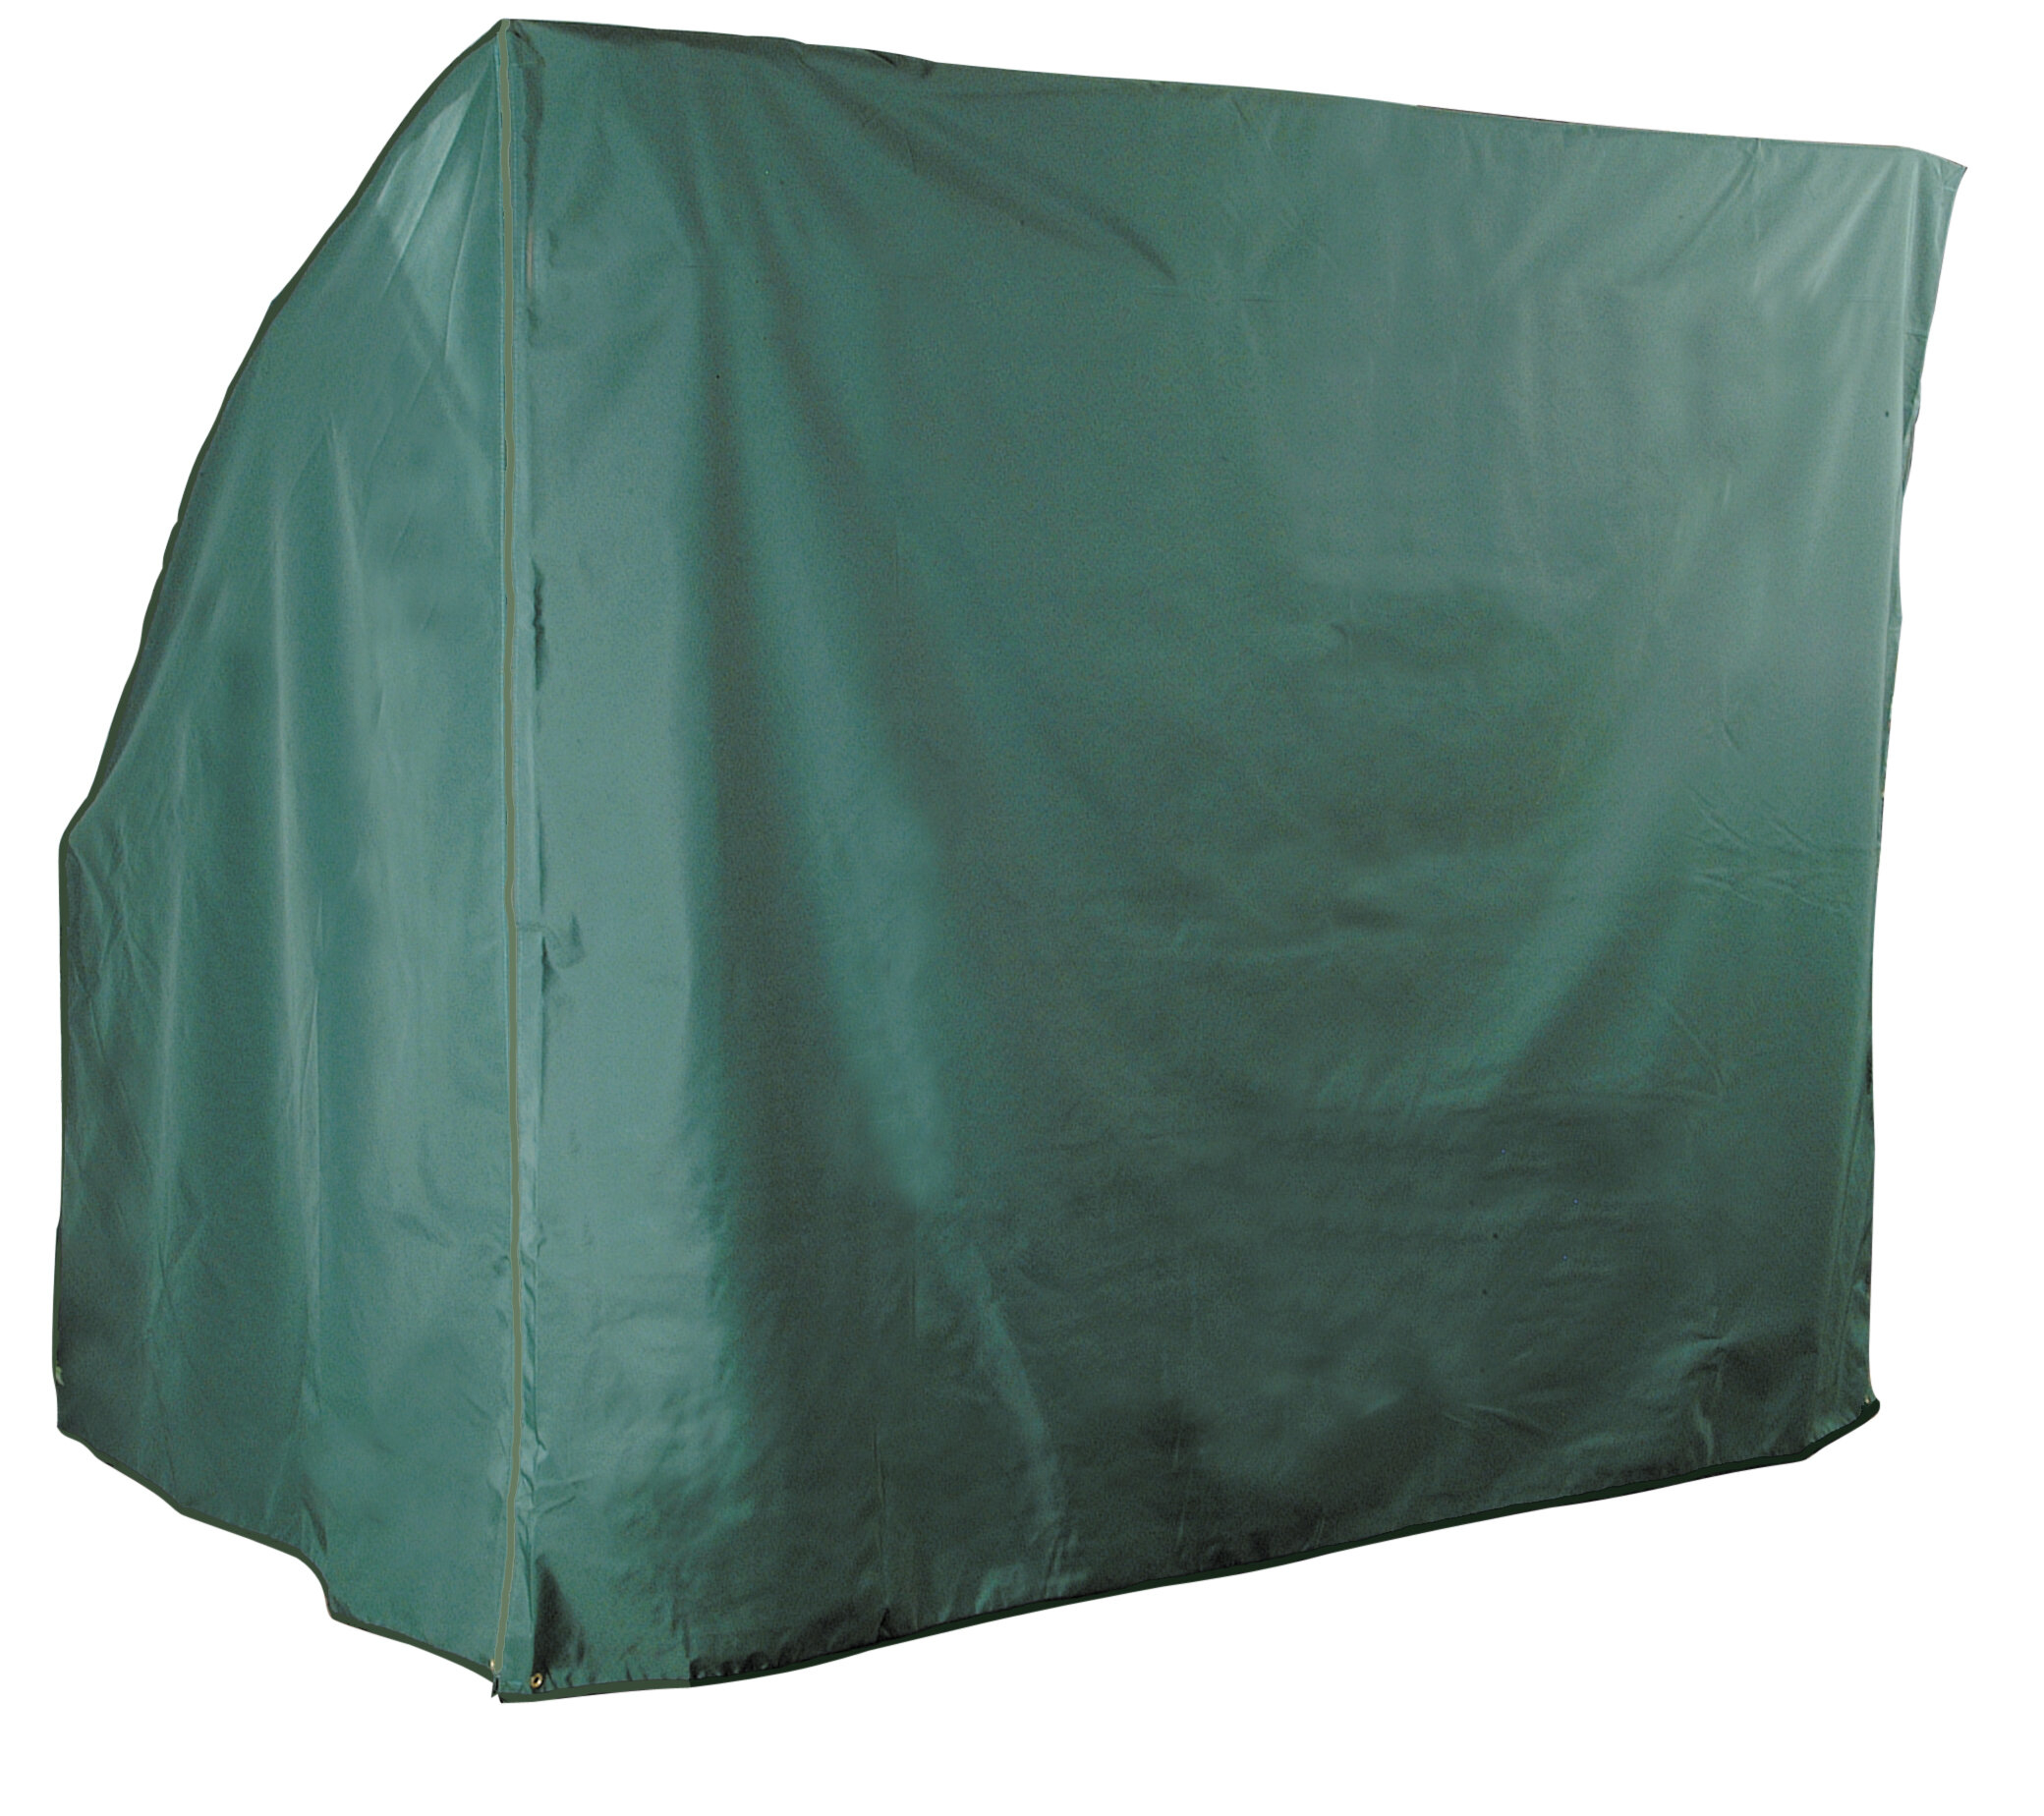 Bosmere C501 Waterproof Swing Seat Cover, 68 by 49 by 67-Inch